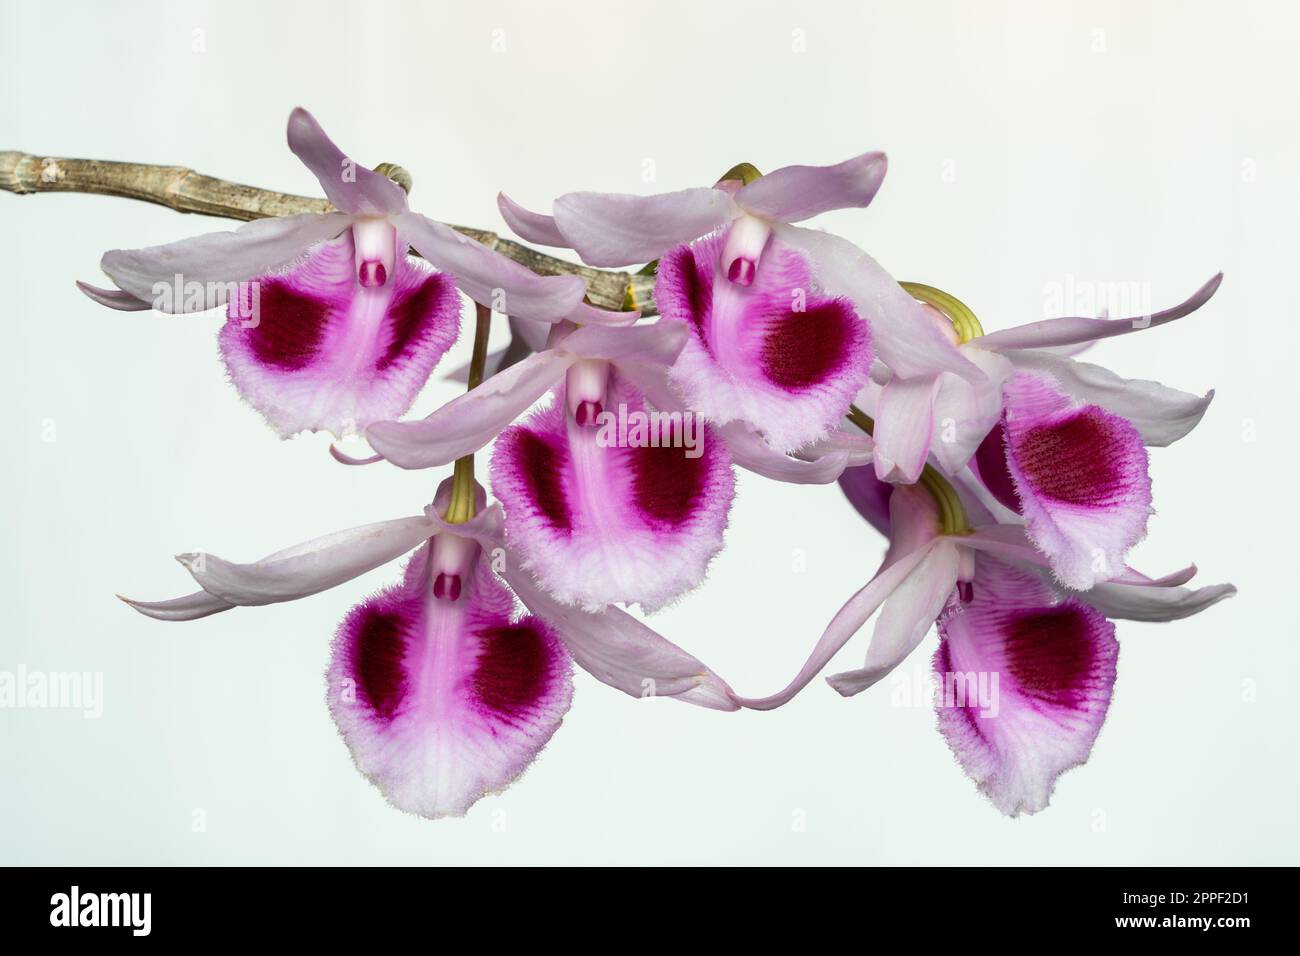 Closeup view of colorful purple pink and white flowers of epiphytic tropical orchid species dendrobium anosmum blooming isolated on white background Stock Photo